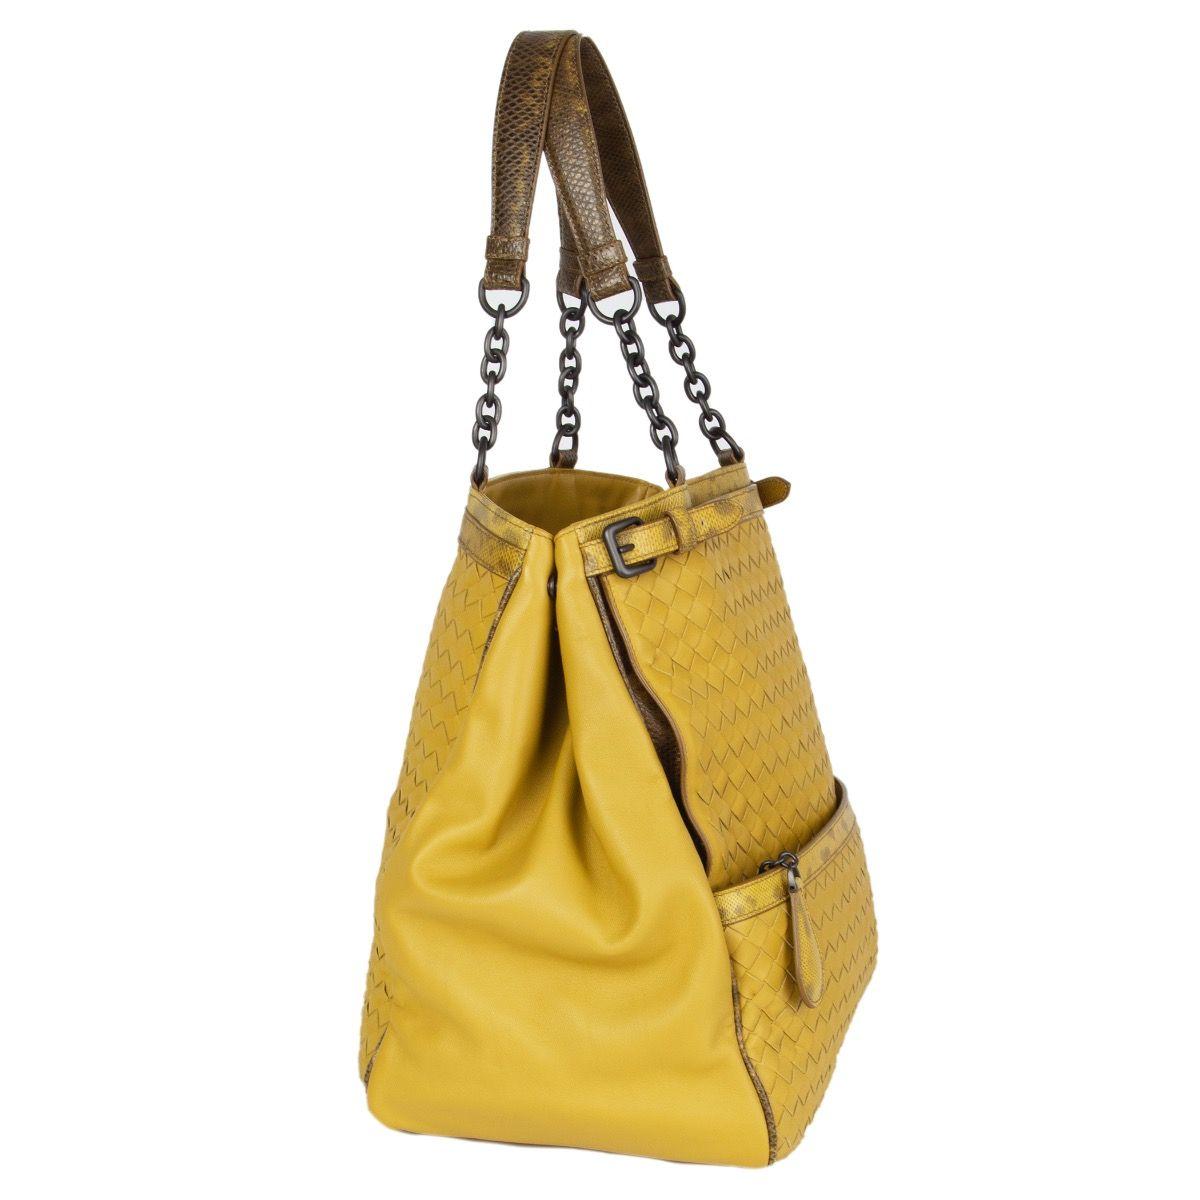 Bottega Veneta 'Nappa & Karung Tote' shoulder bag in Luteous (chartreuse yellow) Intrecciato back and front part featuring smooth nappa leather side panels and karung trimming and handles. Bag has two front pockets, one with a zip closure and one